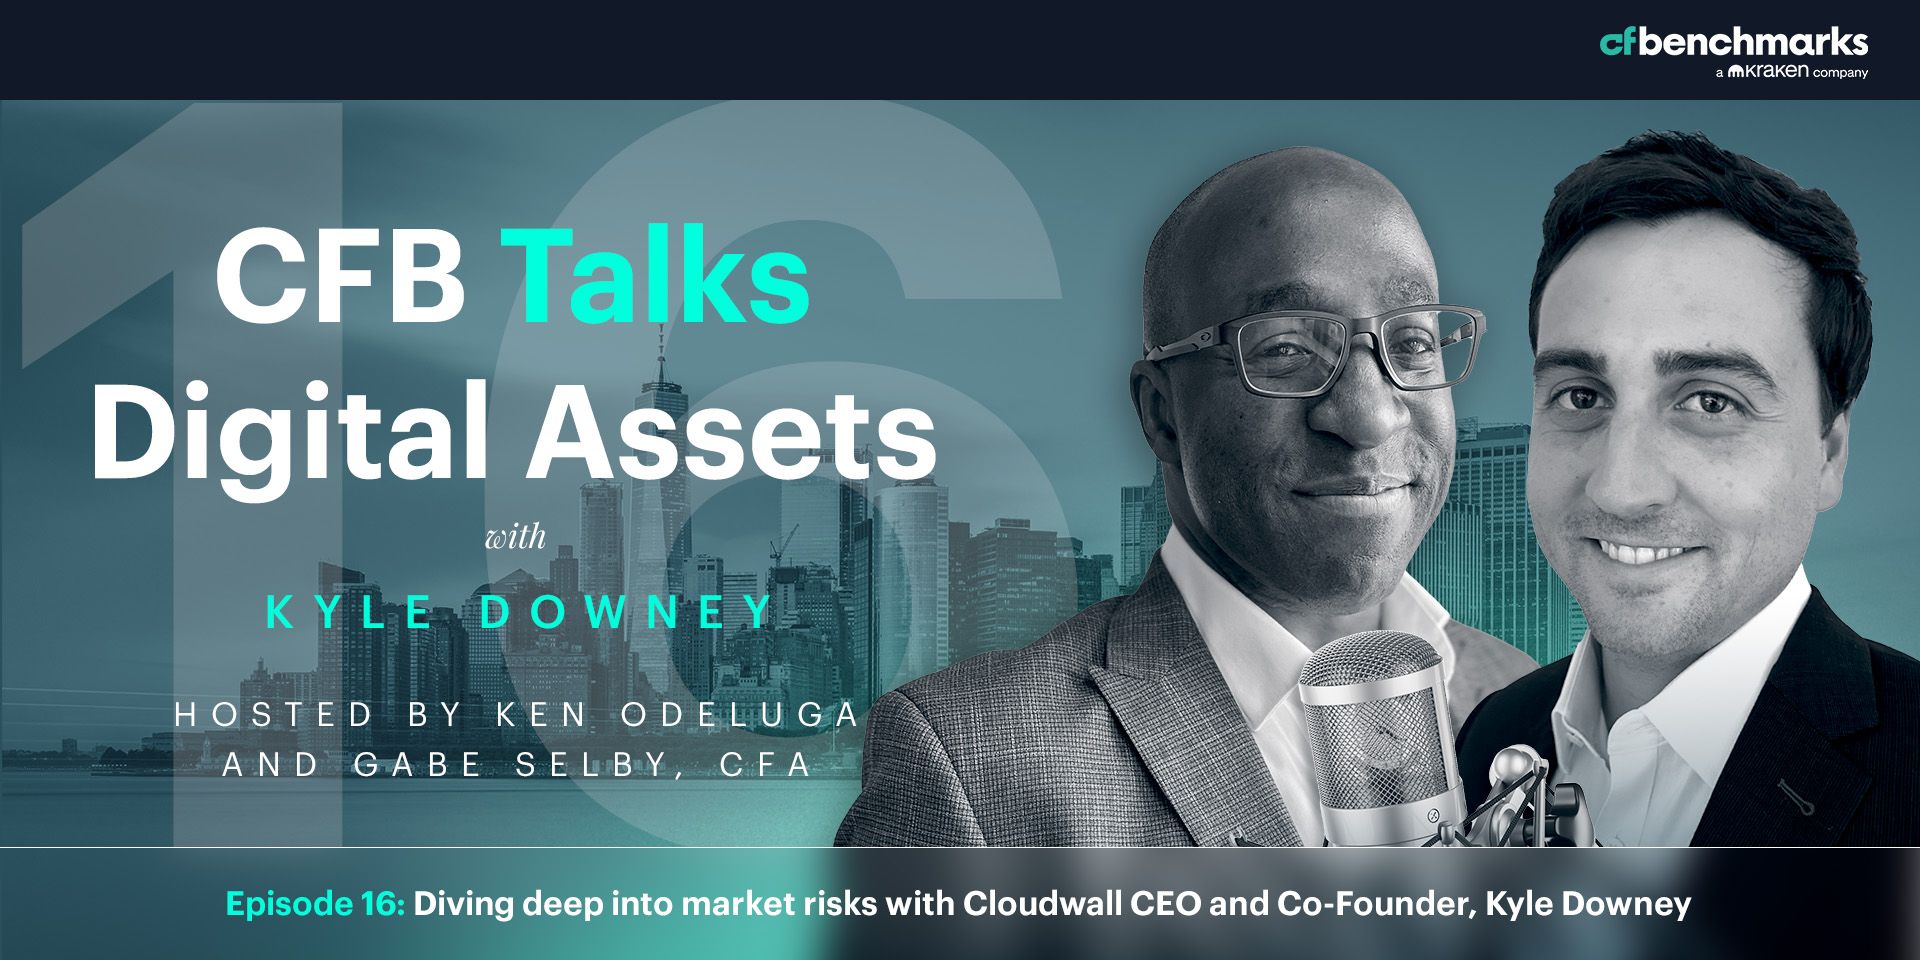 CFB Talks Digital Assets Episode 16: Diving deep into market risks with Cloudwall CEO and Co-Founder, Kyle Downey